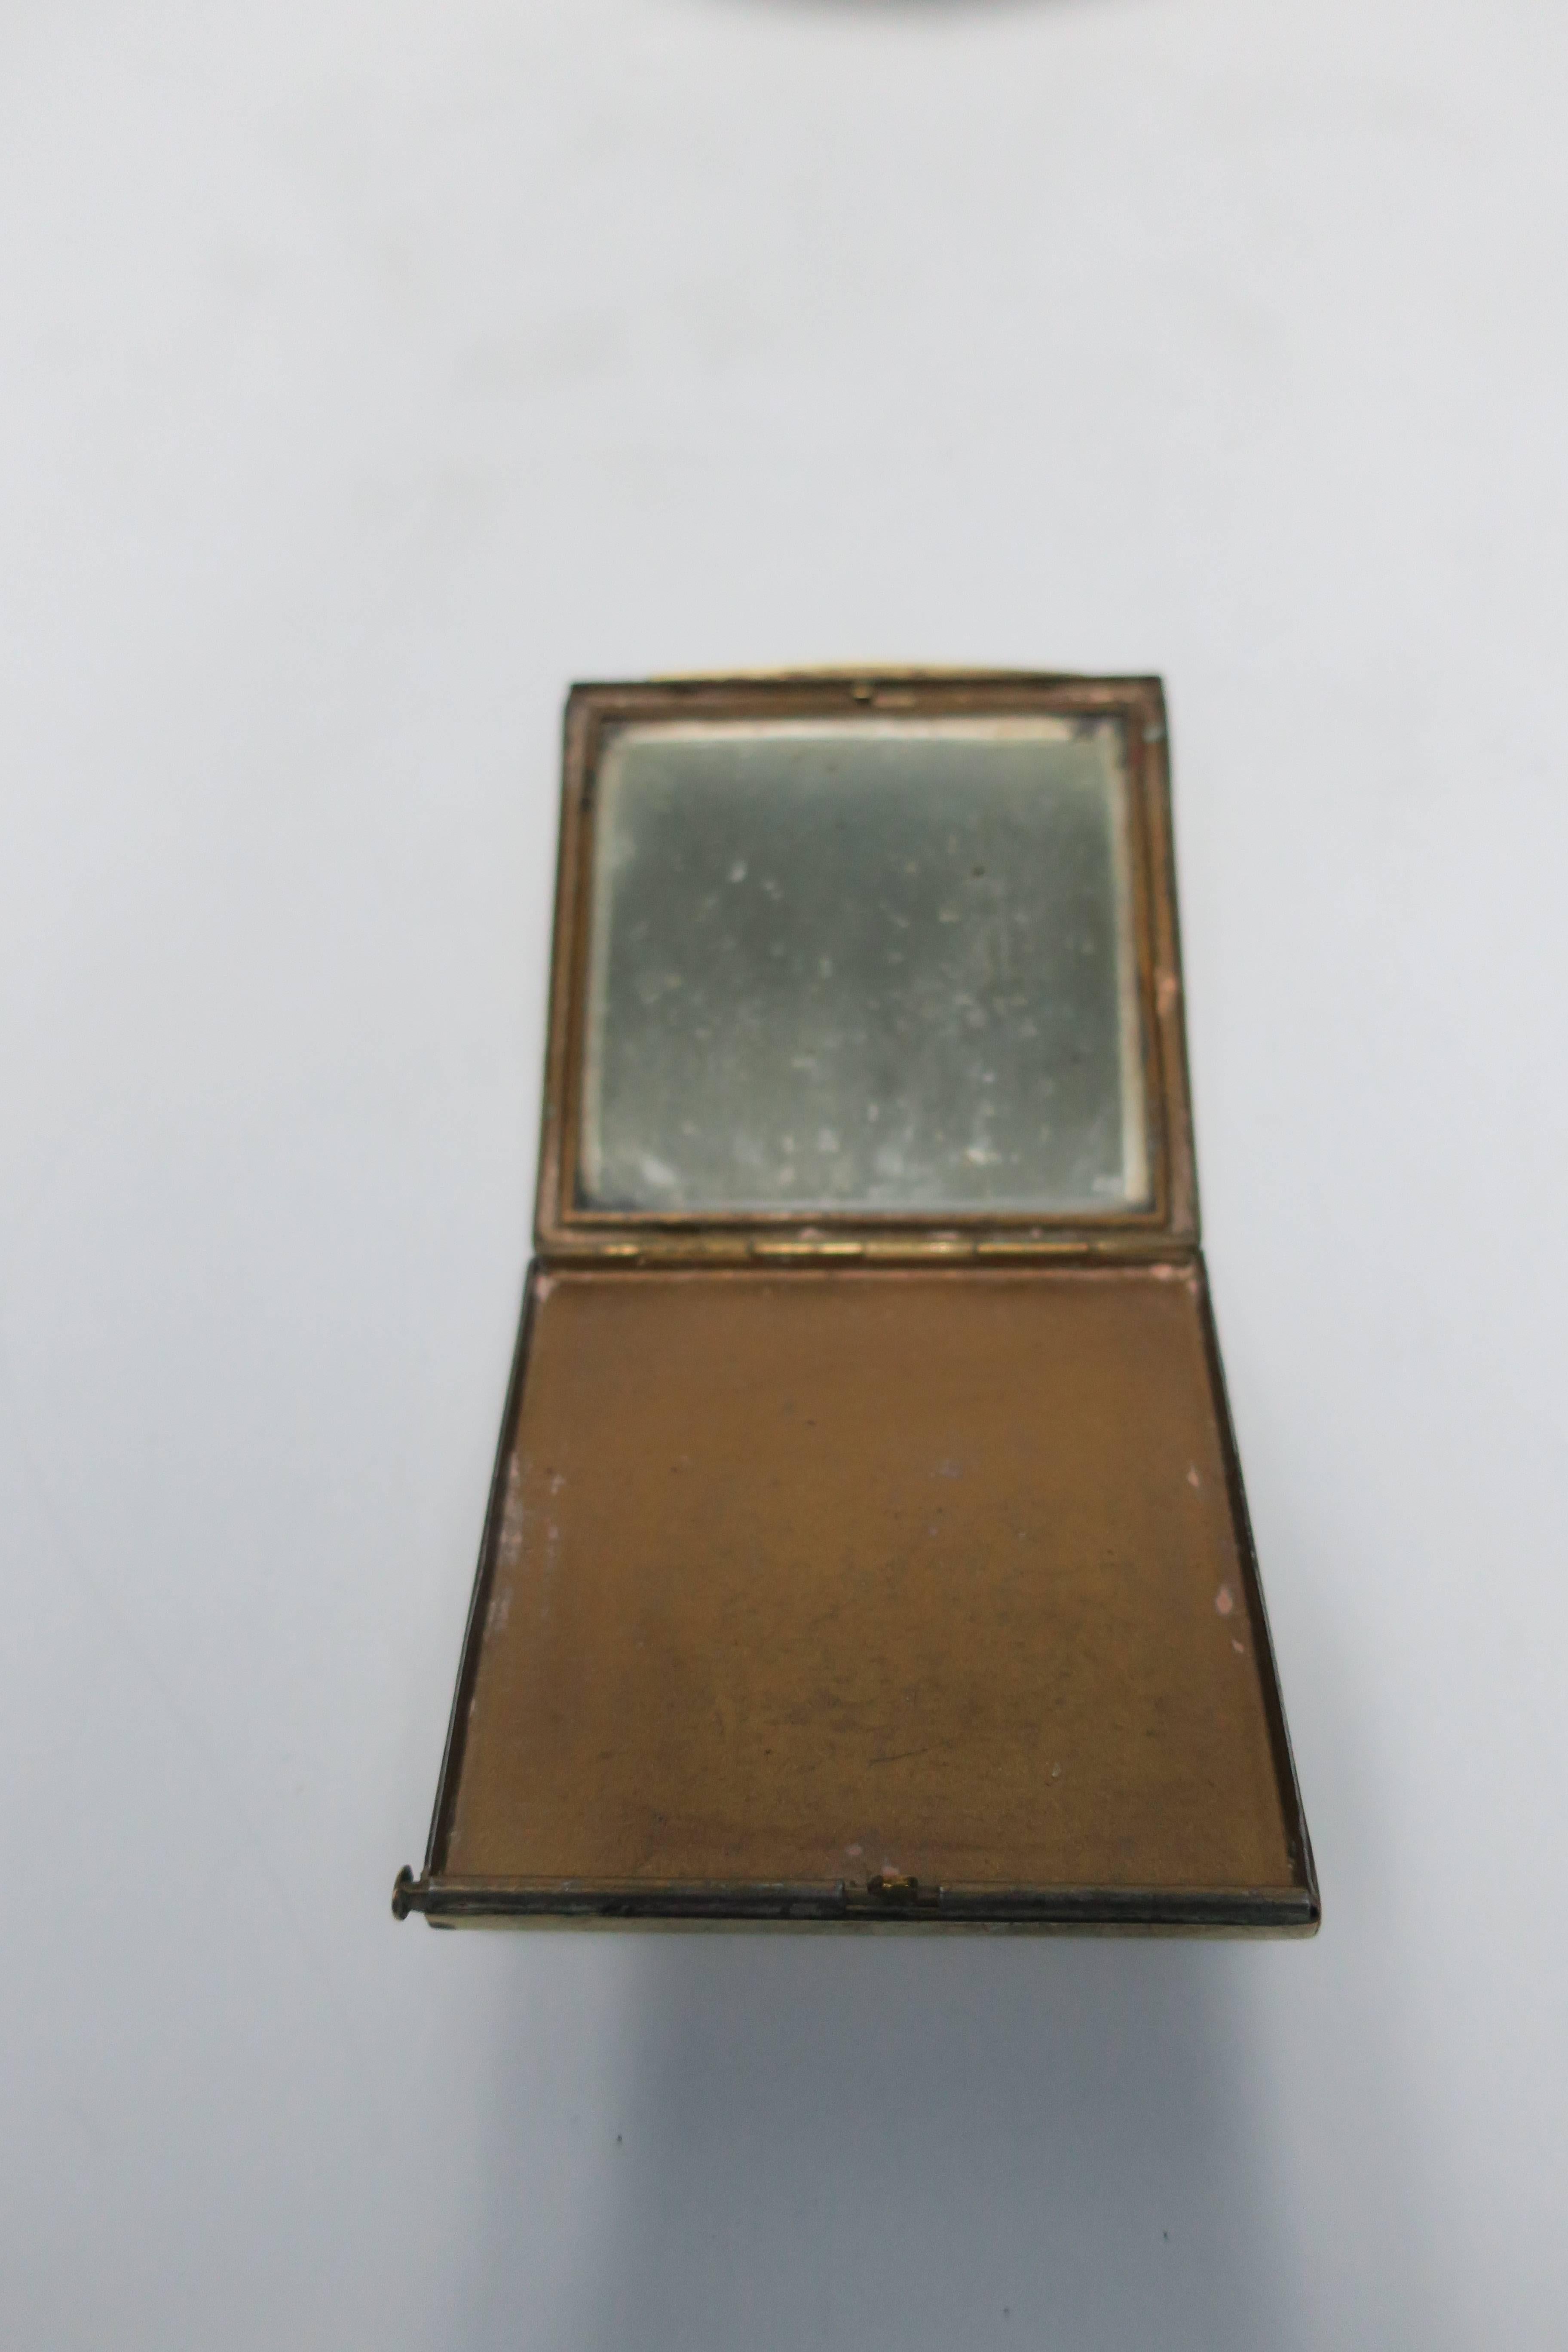 20th Century Vintage Brass and Mirror Compact Case or Box with Map of France